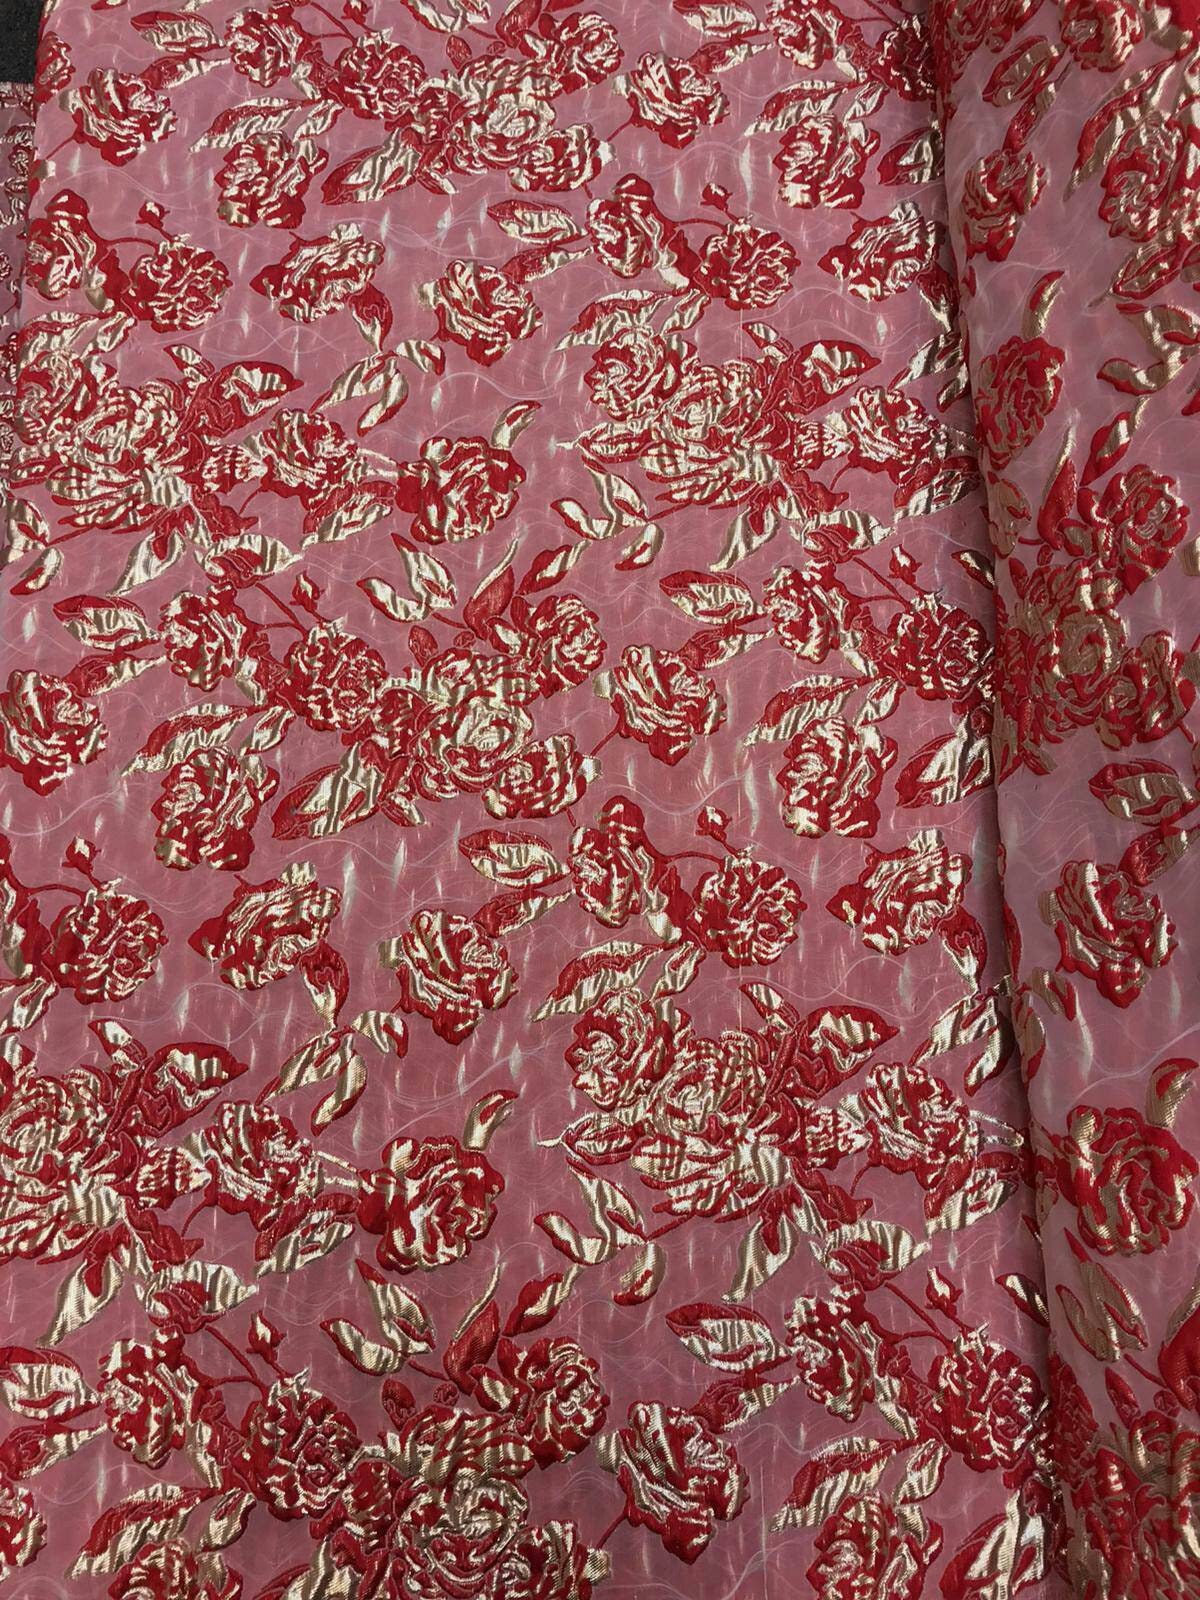 Brocade Floral Flowers Red and Metallic Gold Fabric by the Yard Shine Prom Evening Dress Gorgeous Decoration Dancer Clothing Jacquard Floral